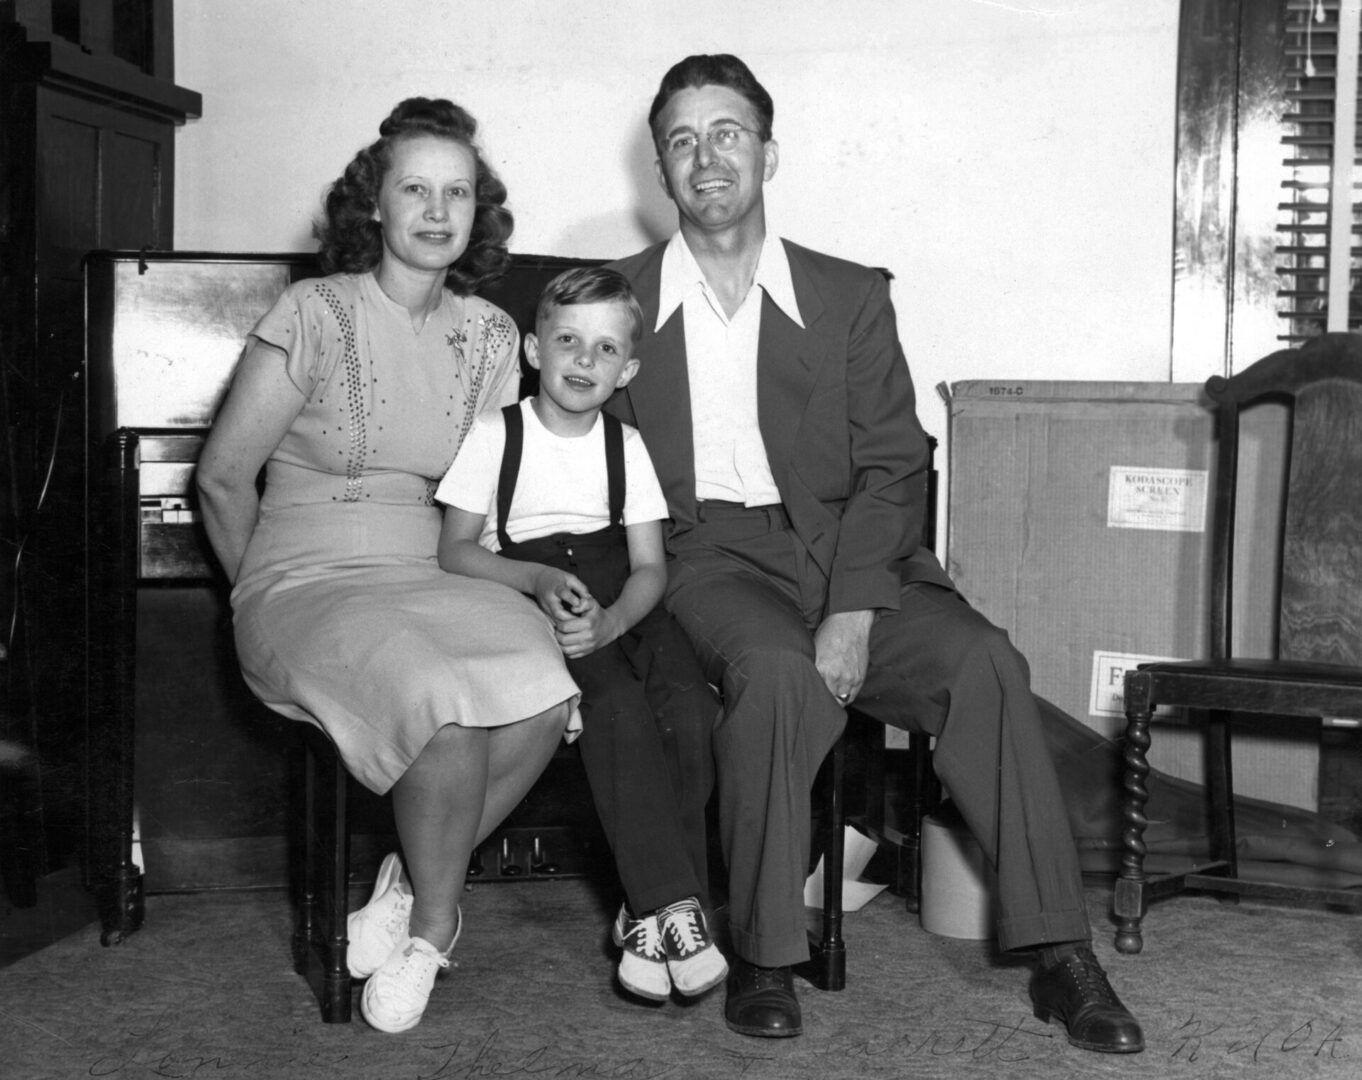 A man and woman sitting next to a young boy.